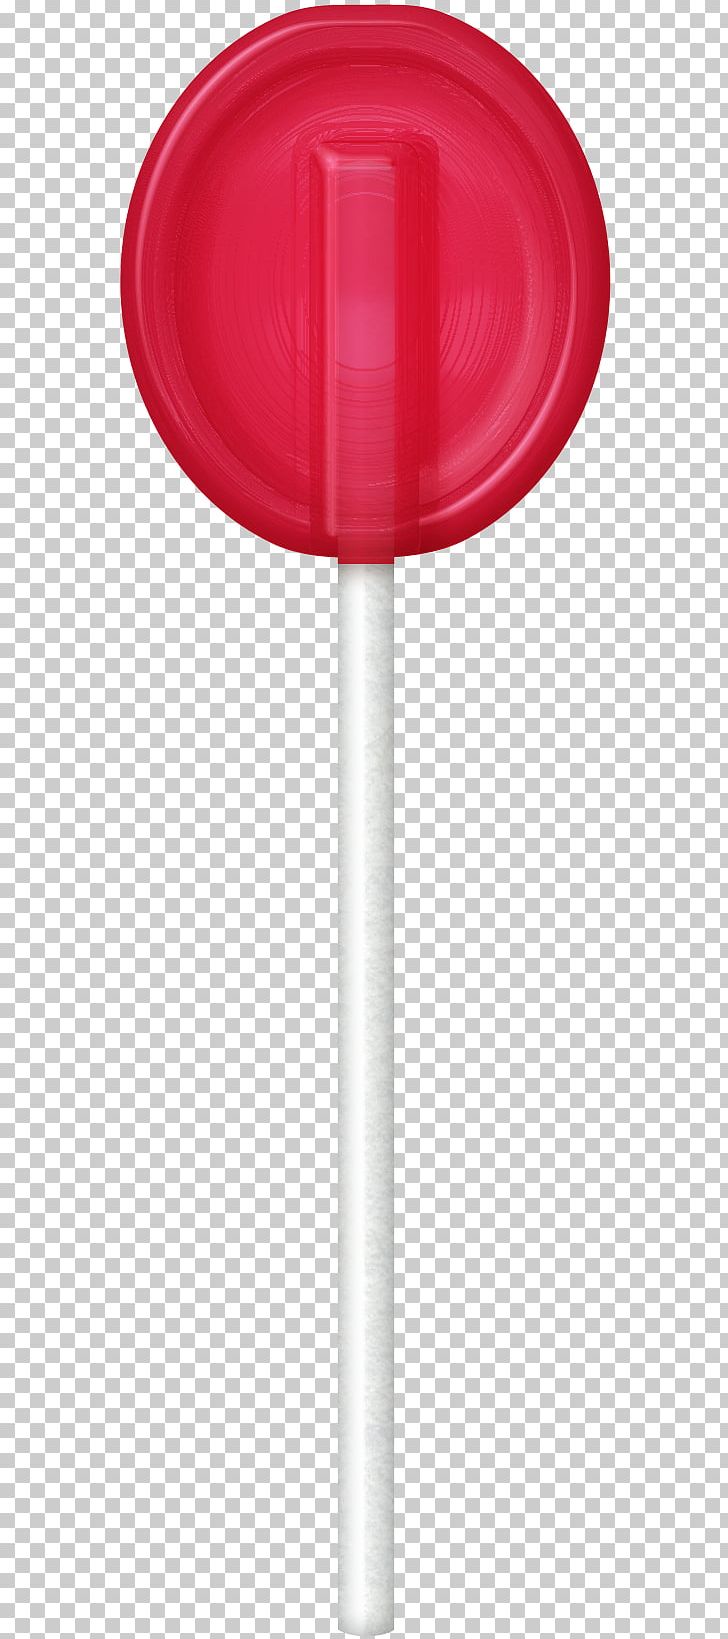 Lollipop Child PNG, Clipart, Candy, Candy Lollipop, Cartoon Lollipop, Child, Child Elements Free PNG Download